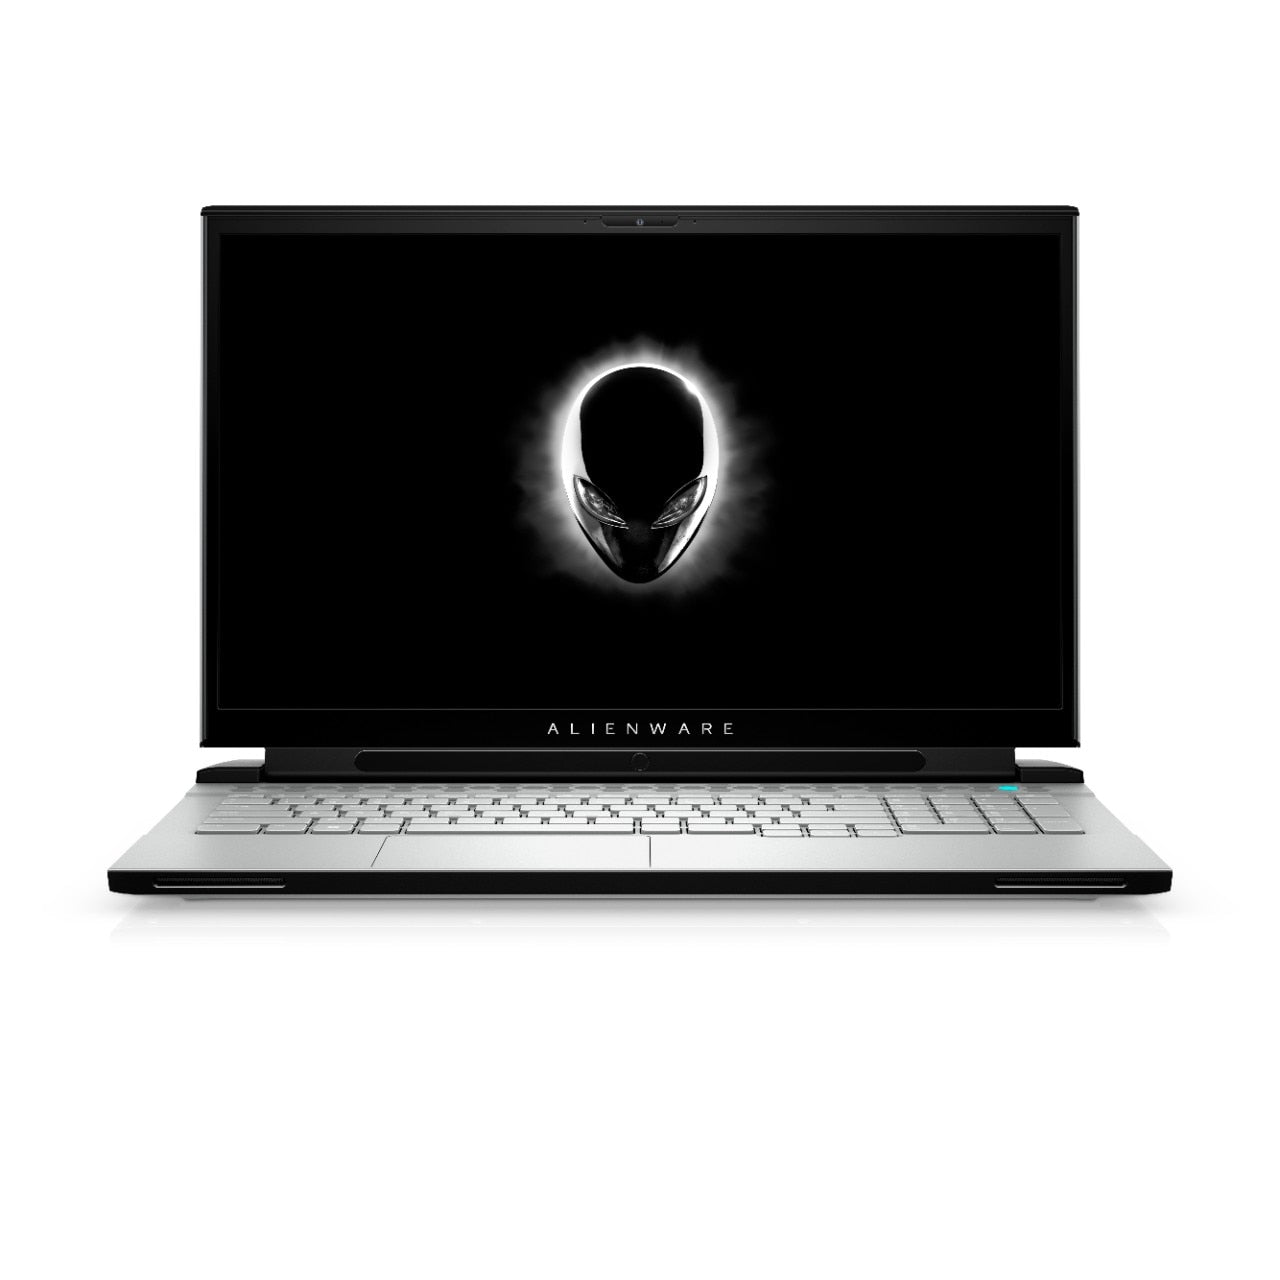 BSB-O2WFLXK8O56YBED9-NEW-NEW-LAP-DL 2020 Dell Alienware m17 R3 Laptop 17.3" - i7 - i7-10750H - Six Core 5Ghz - 1TB SSD + 1TB SSD - 32GB RAM - Nvidia GeForce RTX 2080 SUPER - 3840x2160 4K - Windows 10 Home Light